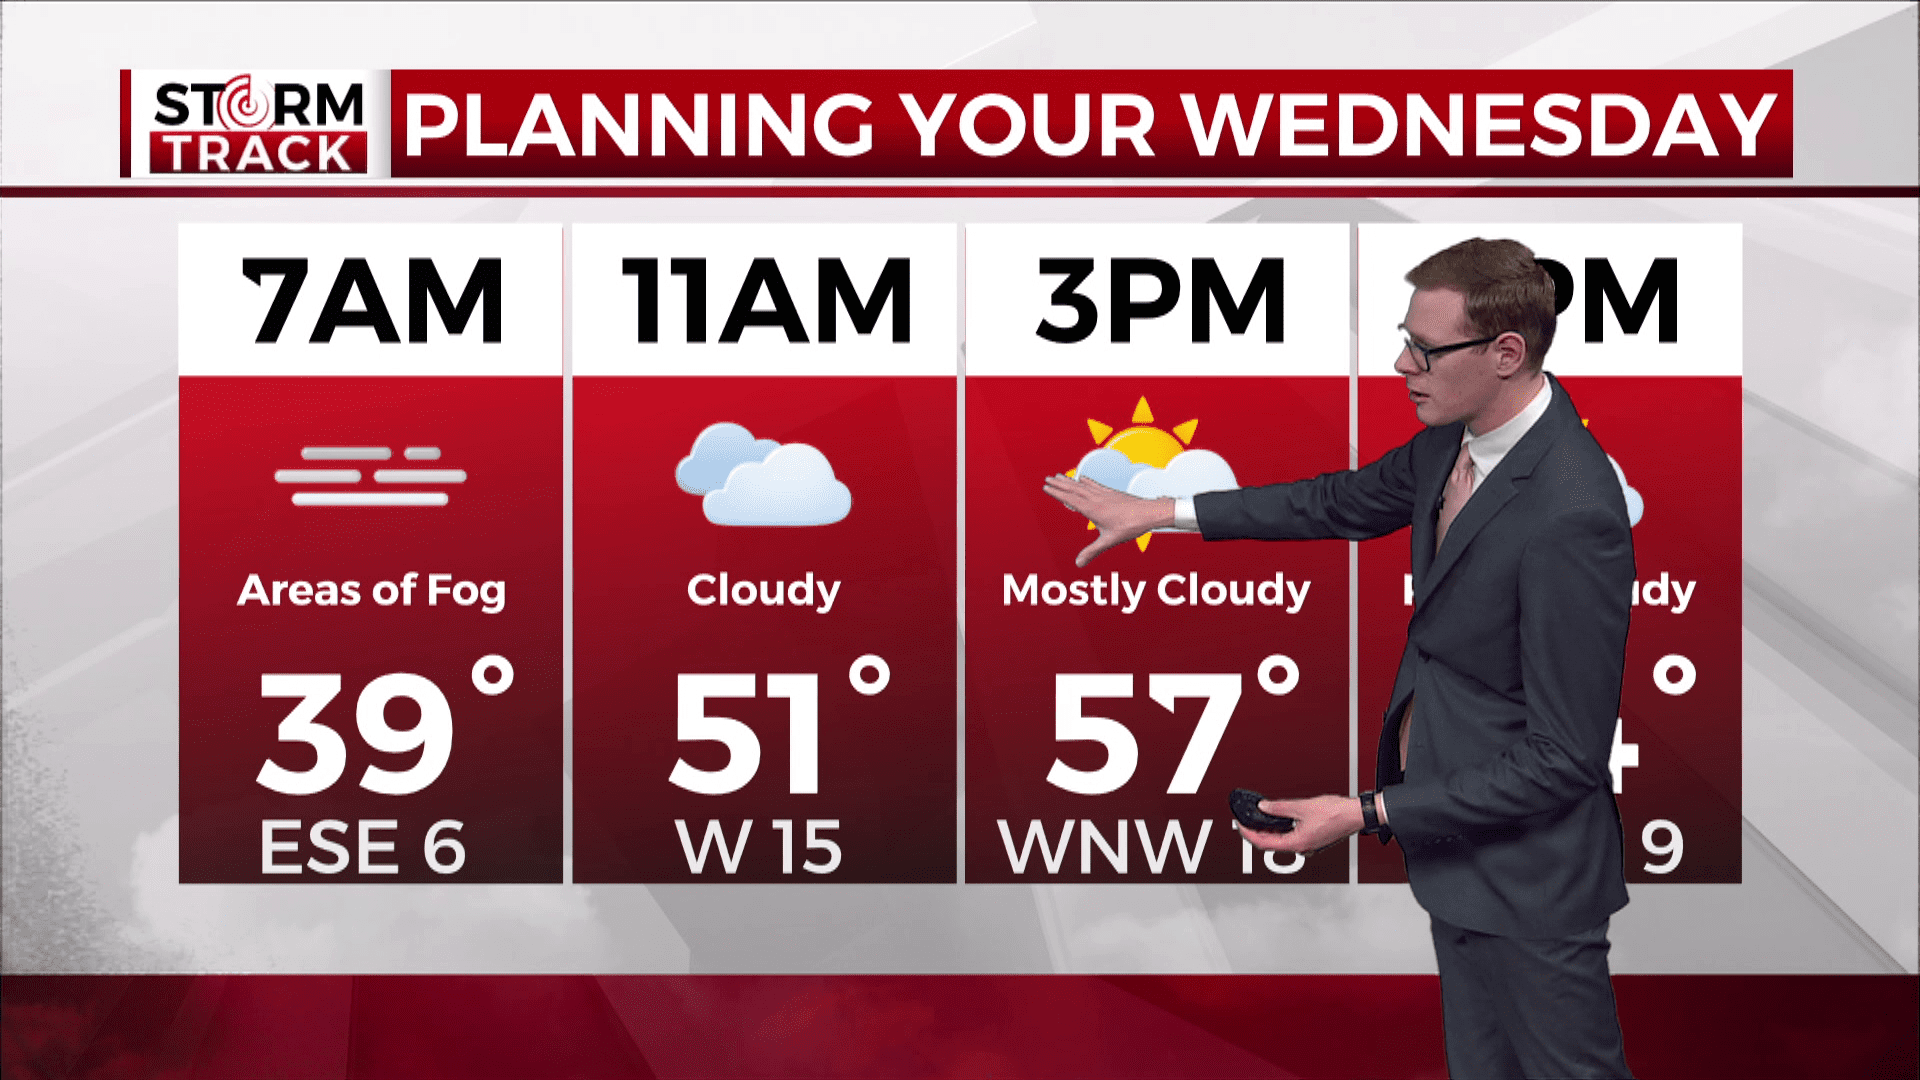 Brandon showing Wednesday's day planner